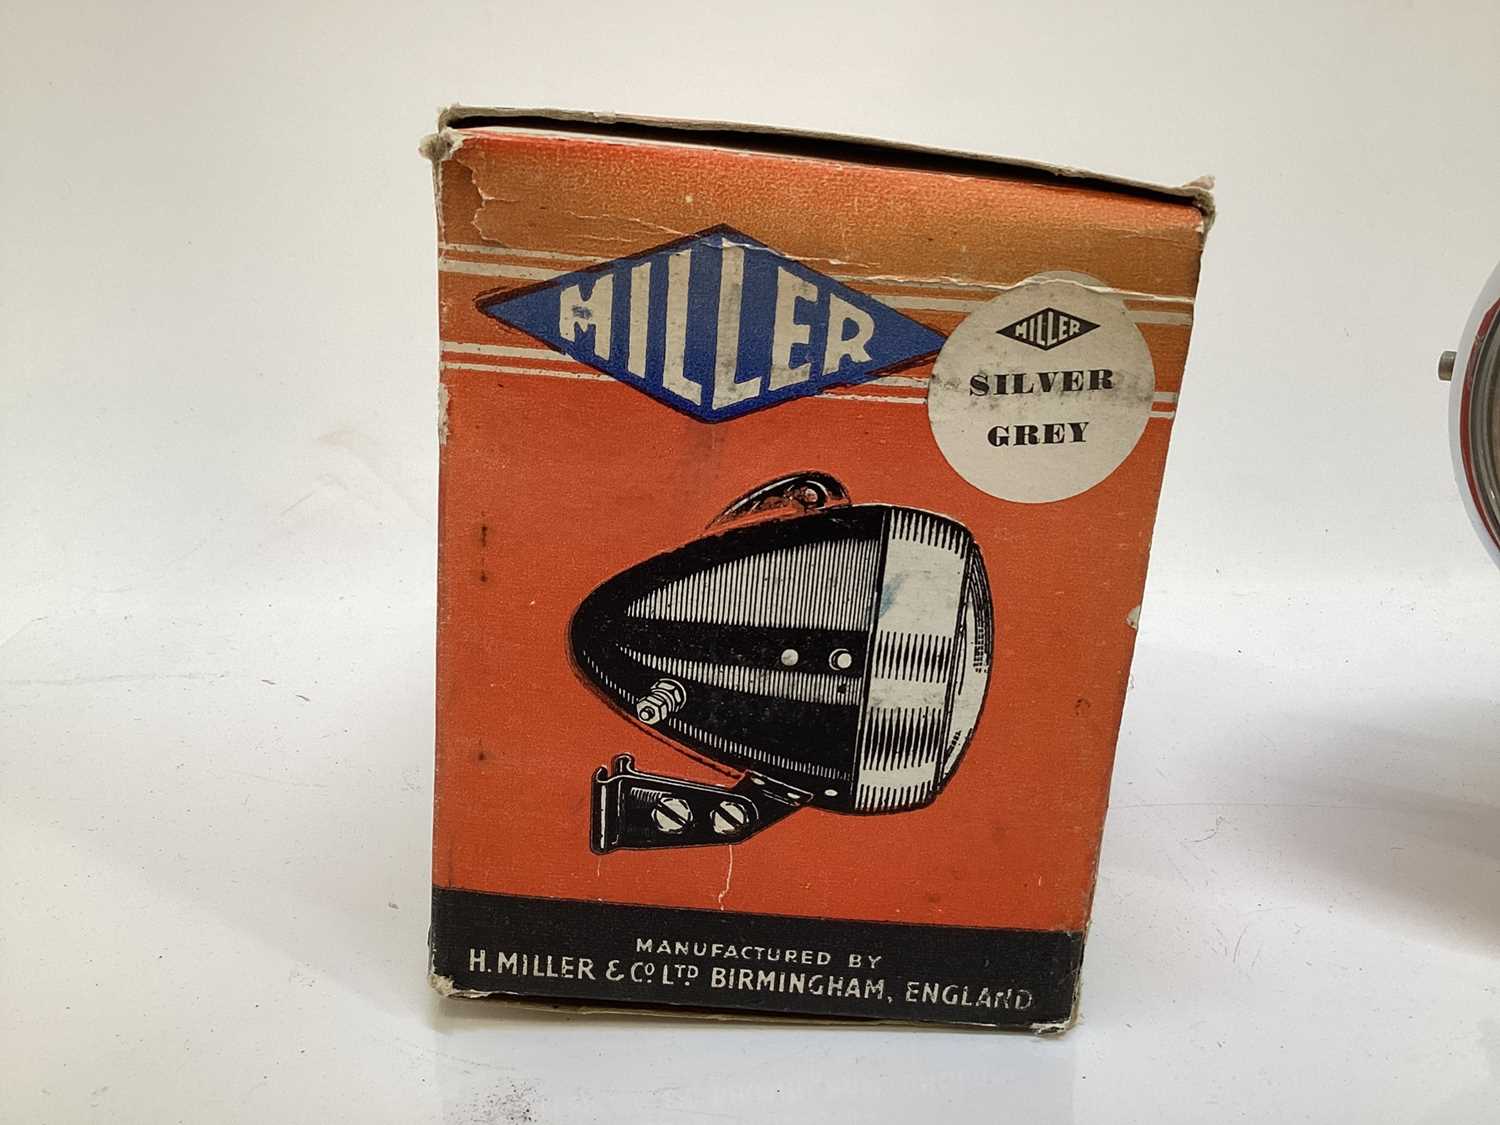 Vintage Miller cycle lamp and generator in original box - new old stock - Image 6 of 12